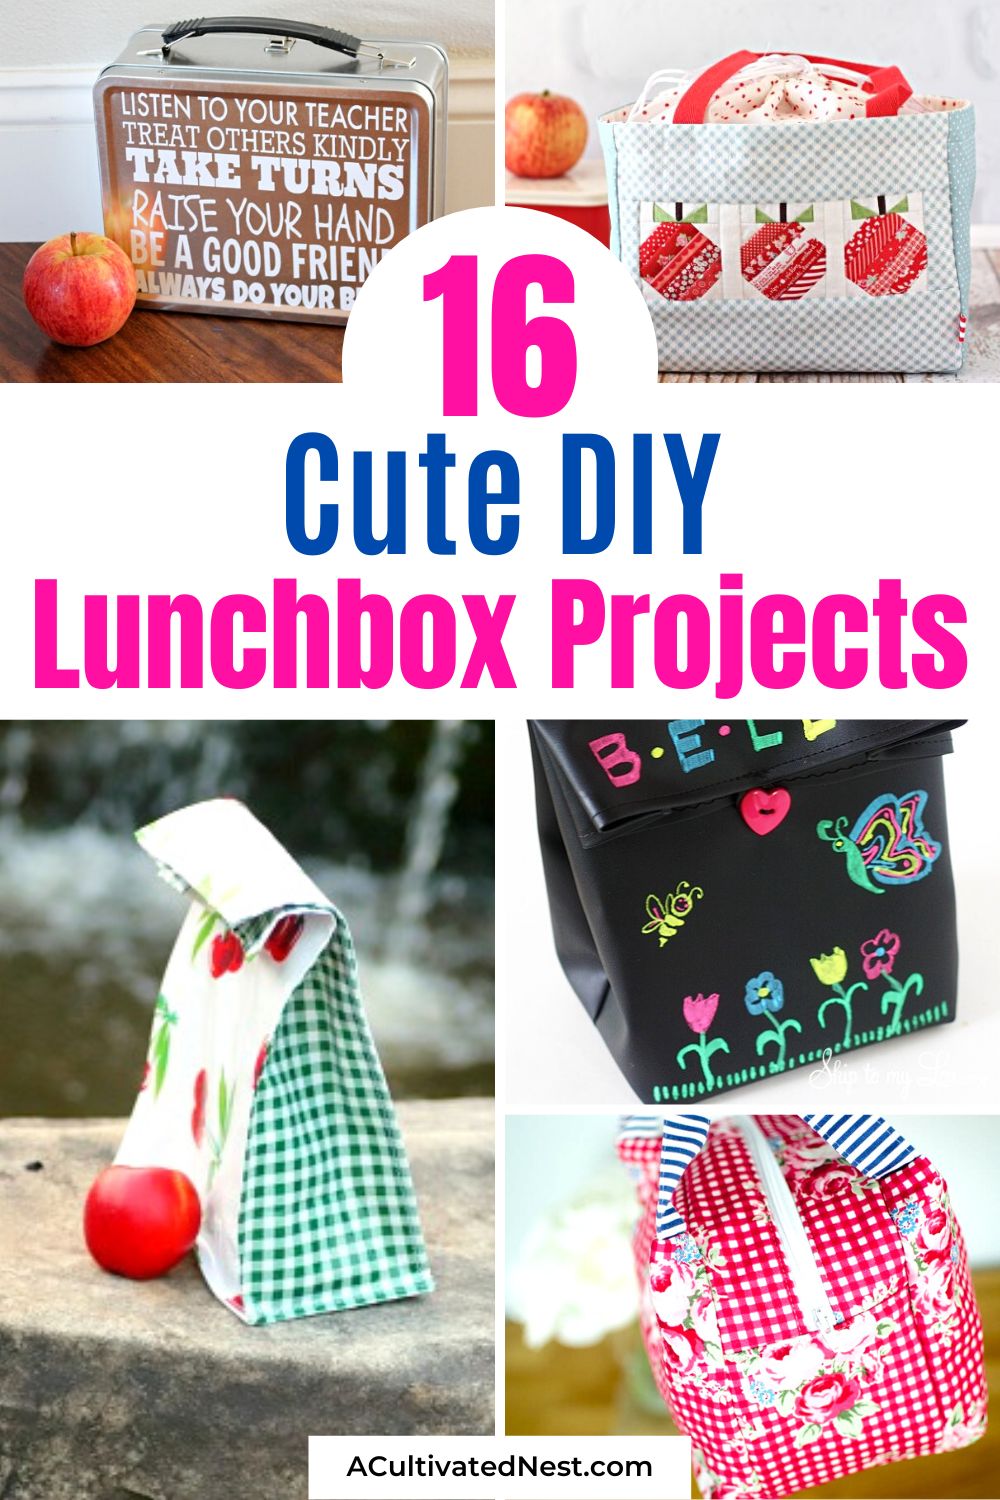 16 Cute DIY Lunchbox Projects- Sew your way to lunchtime delight with these 16 Cute DIY Lunchbox Projects! Whether you're a beginner or an experienced crafter, these charming ideas will make your lunch stand out. Say goodbye to dull lunches and hello to creativity! | #LunchboxCrafts #DIYProjects #lunchboxes #backToSchool #ACultivatedNest